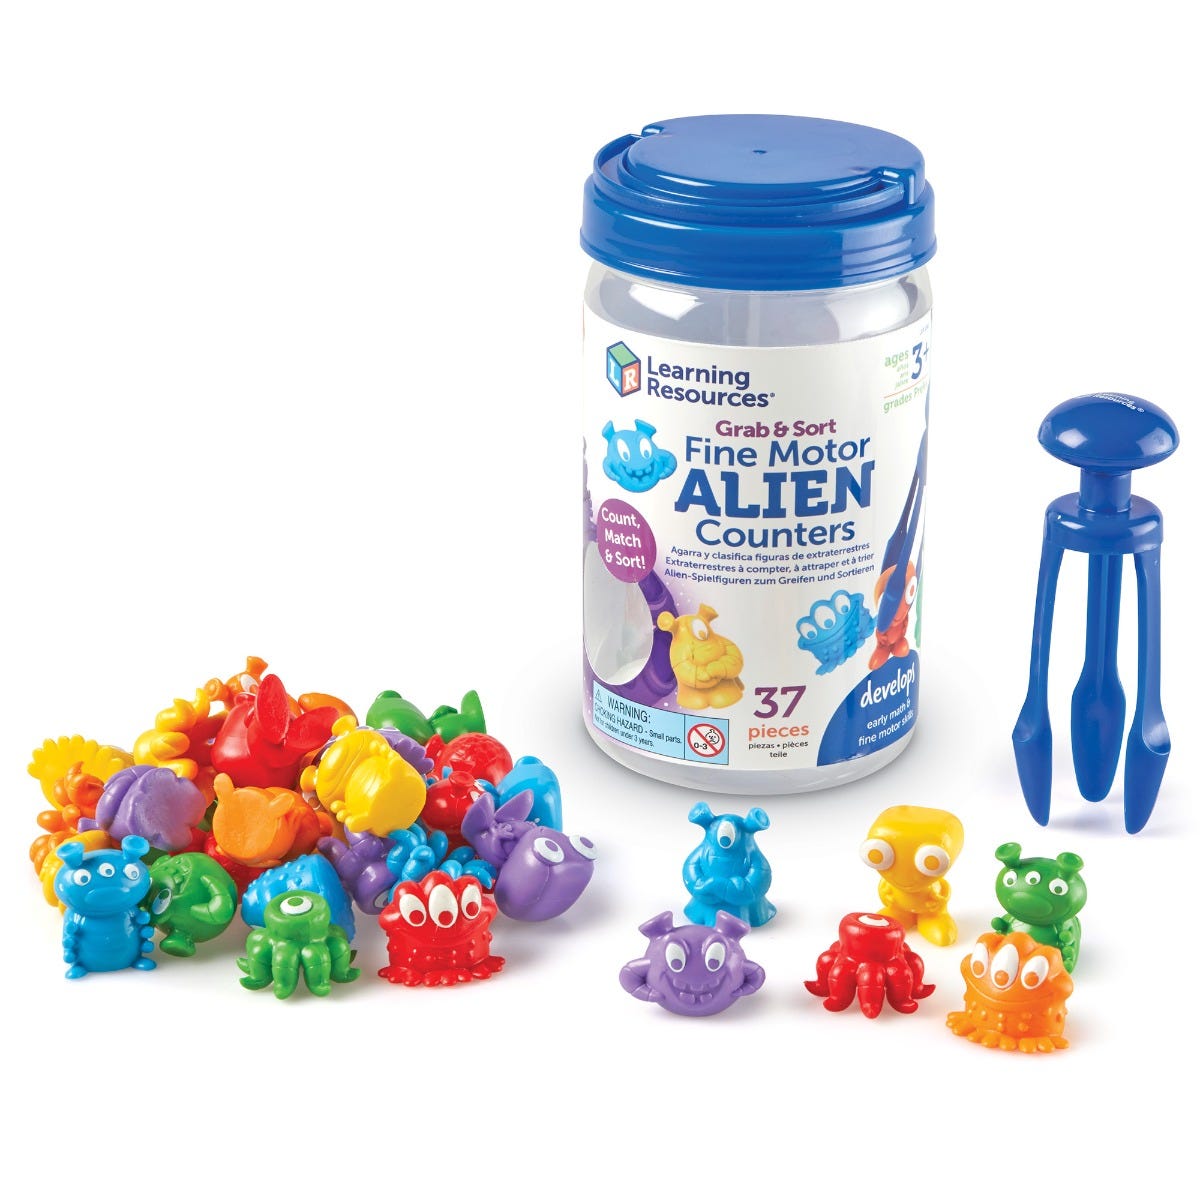 Grab & Sort Fine Motor Alien Counters, Get ready for cosmic maths adventures as children count, pattern, sort, and match the 36 colourful aliens in this fun maths set. Children use the Tri-Grip Tongs to pick up and sort the alien counters which come in 6 bright colours and 6 alien shapes. Made for little hands, the Tri-Grip Tongs have indentations that intuitively guide children’s fingers and get little hands used to the position they’ll need to achieve to hold a pencil. Count, order, sort, pattern, and mat